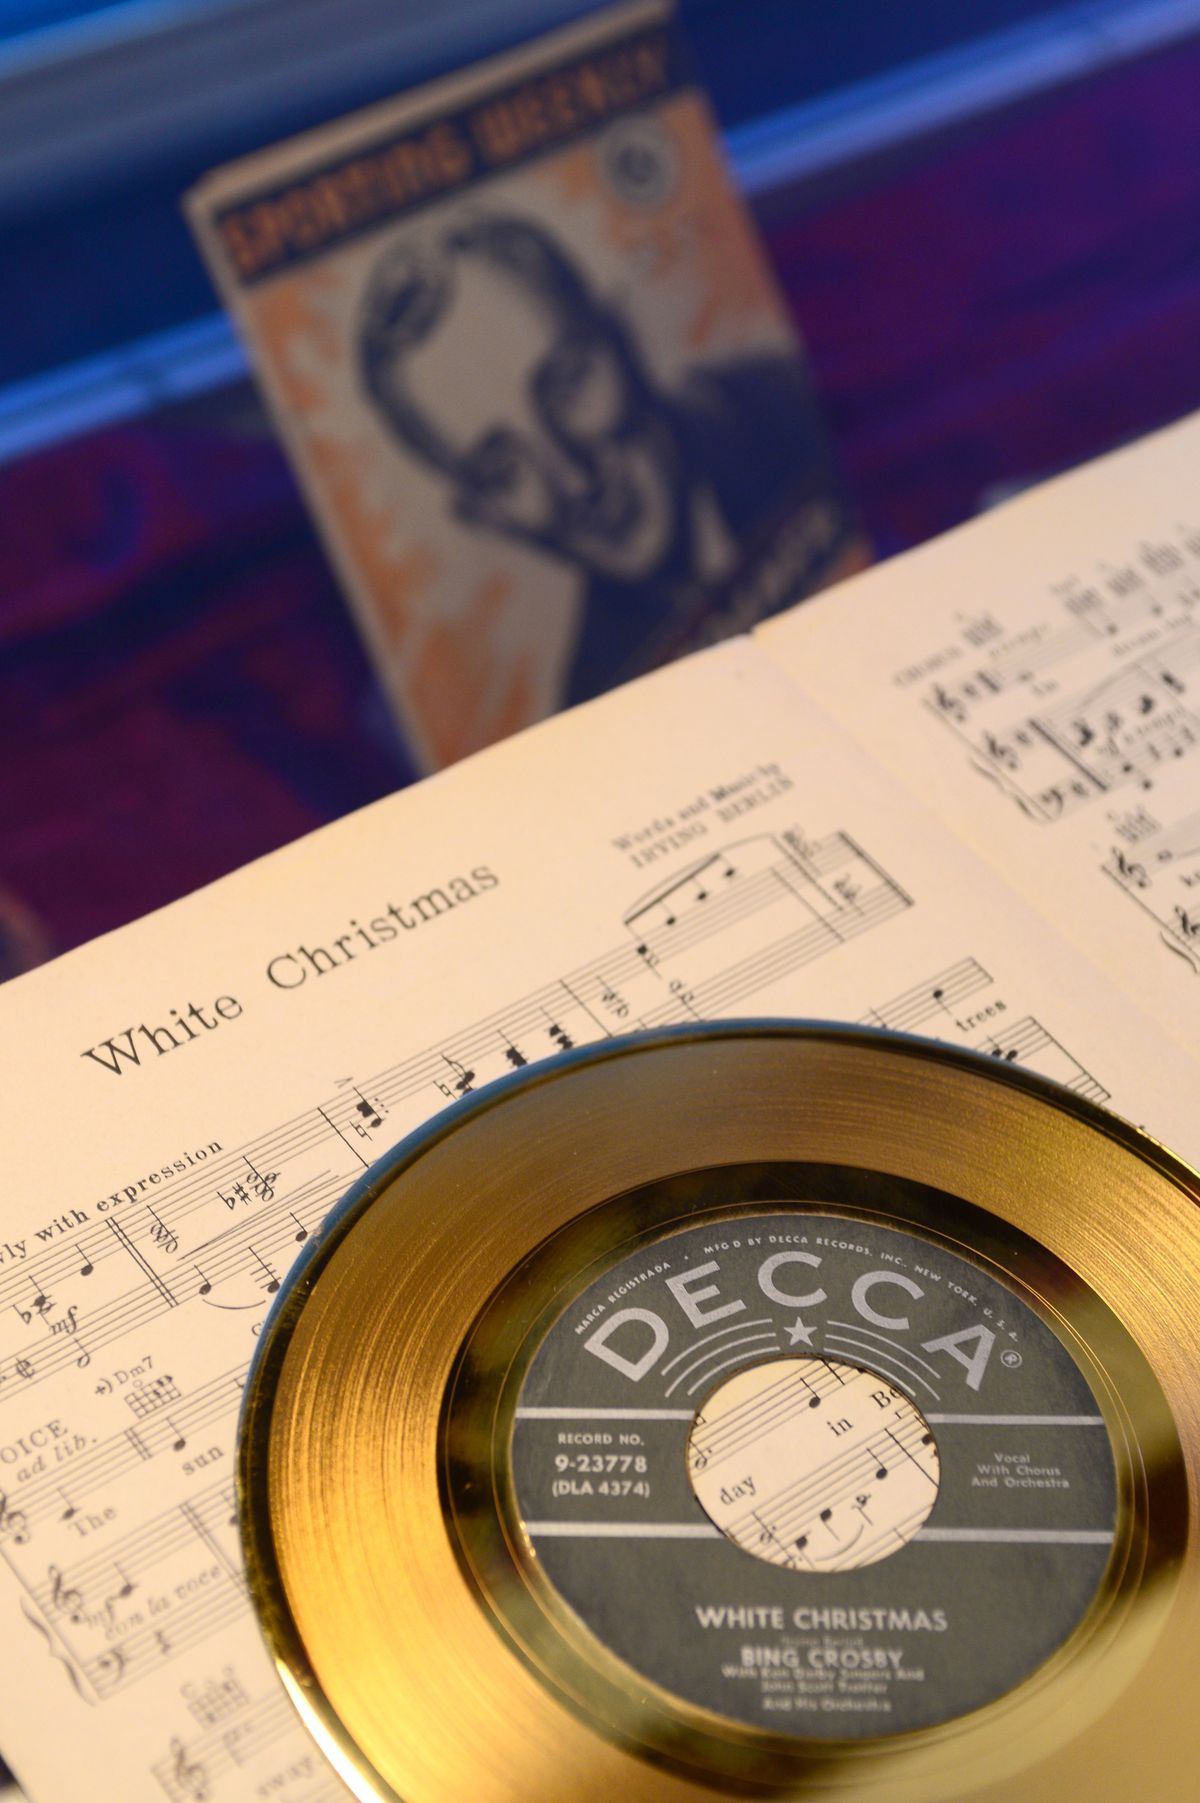 This is the gold record Bing Crosby received for record sales of his song "White Christmas" and the sheet music from when it was first released. These are displayed with many other pieces of memorabilia in the Bing Crosby House Museum on the Gonzaga University campus.  The museum will reopen Saturday for the first time since closing March 2020 due to the pandemic.  (JESSE TINSLEY/The Spokesman-Review)